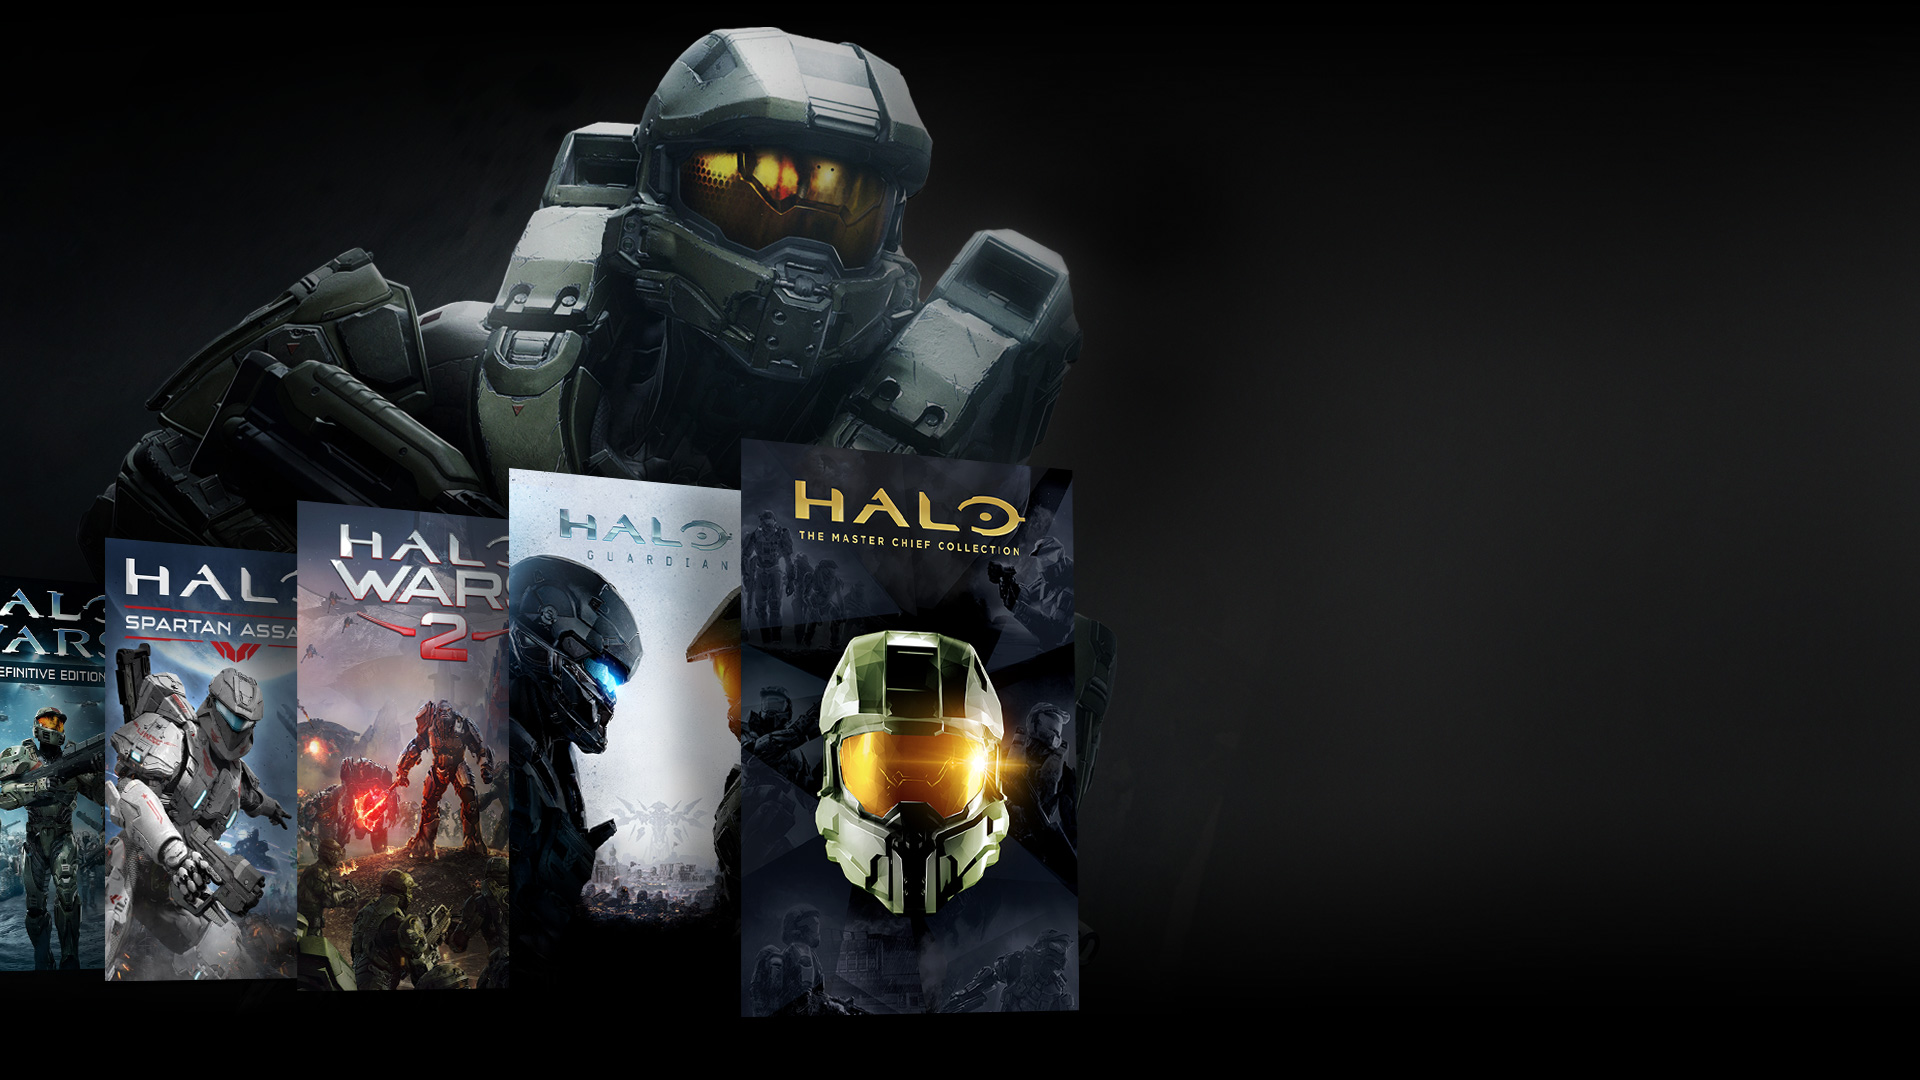 master chief collection xbox store